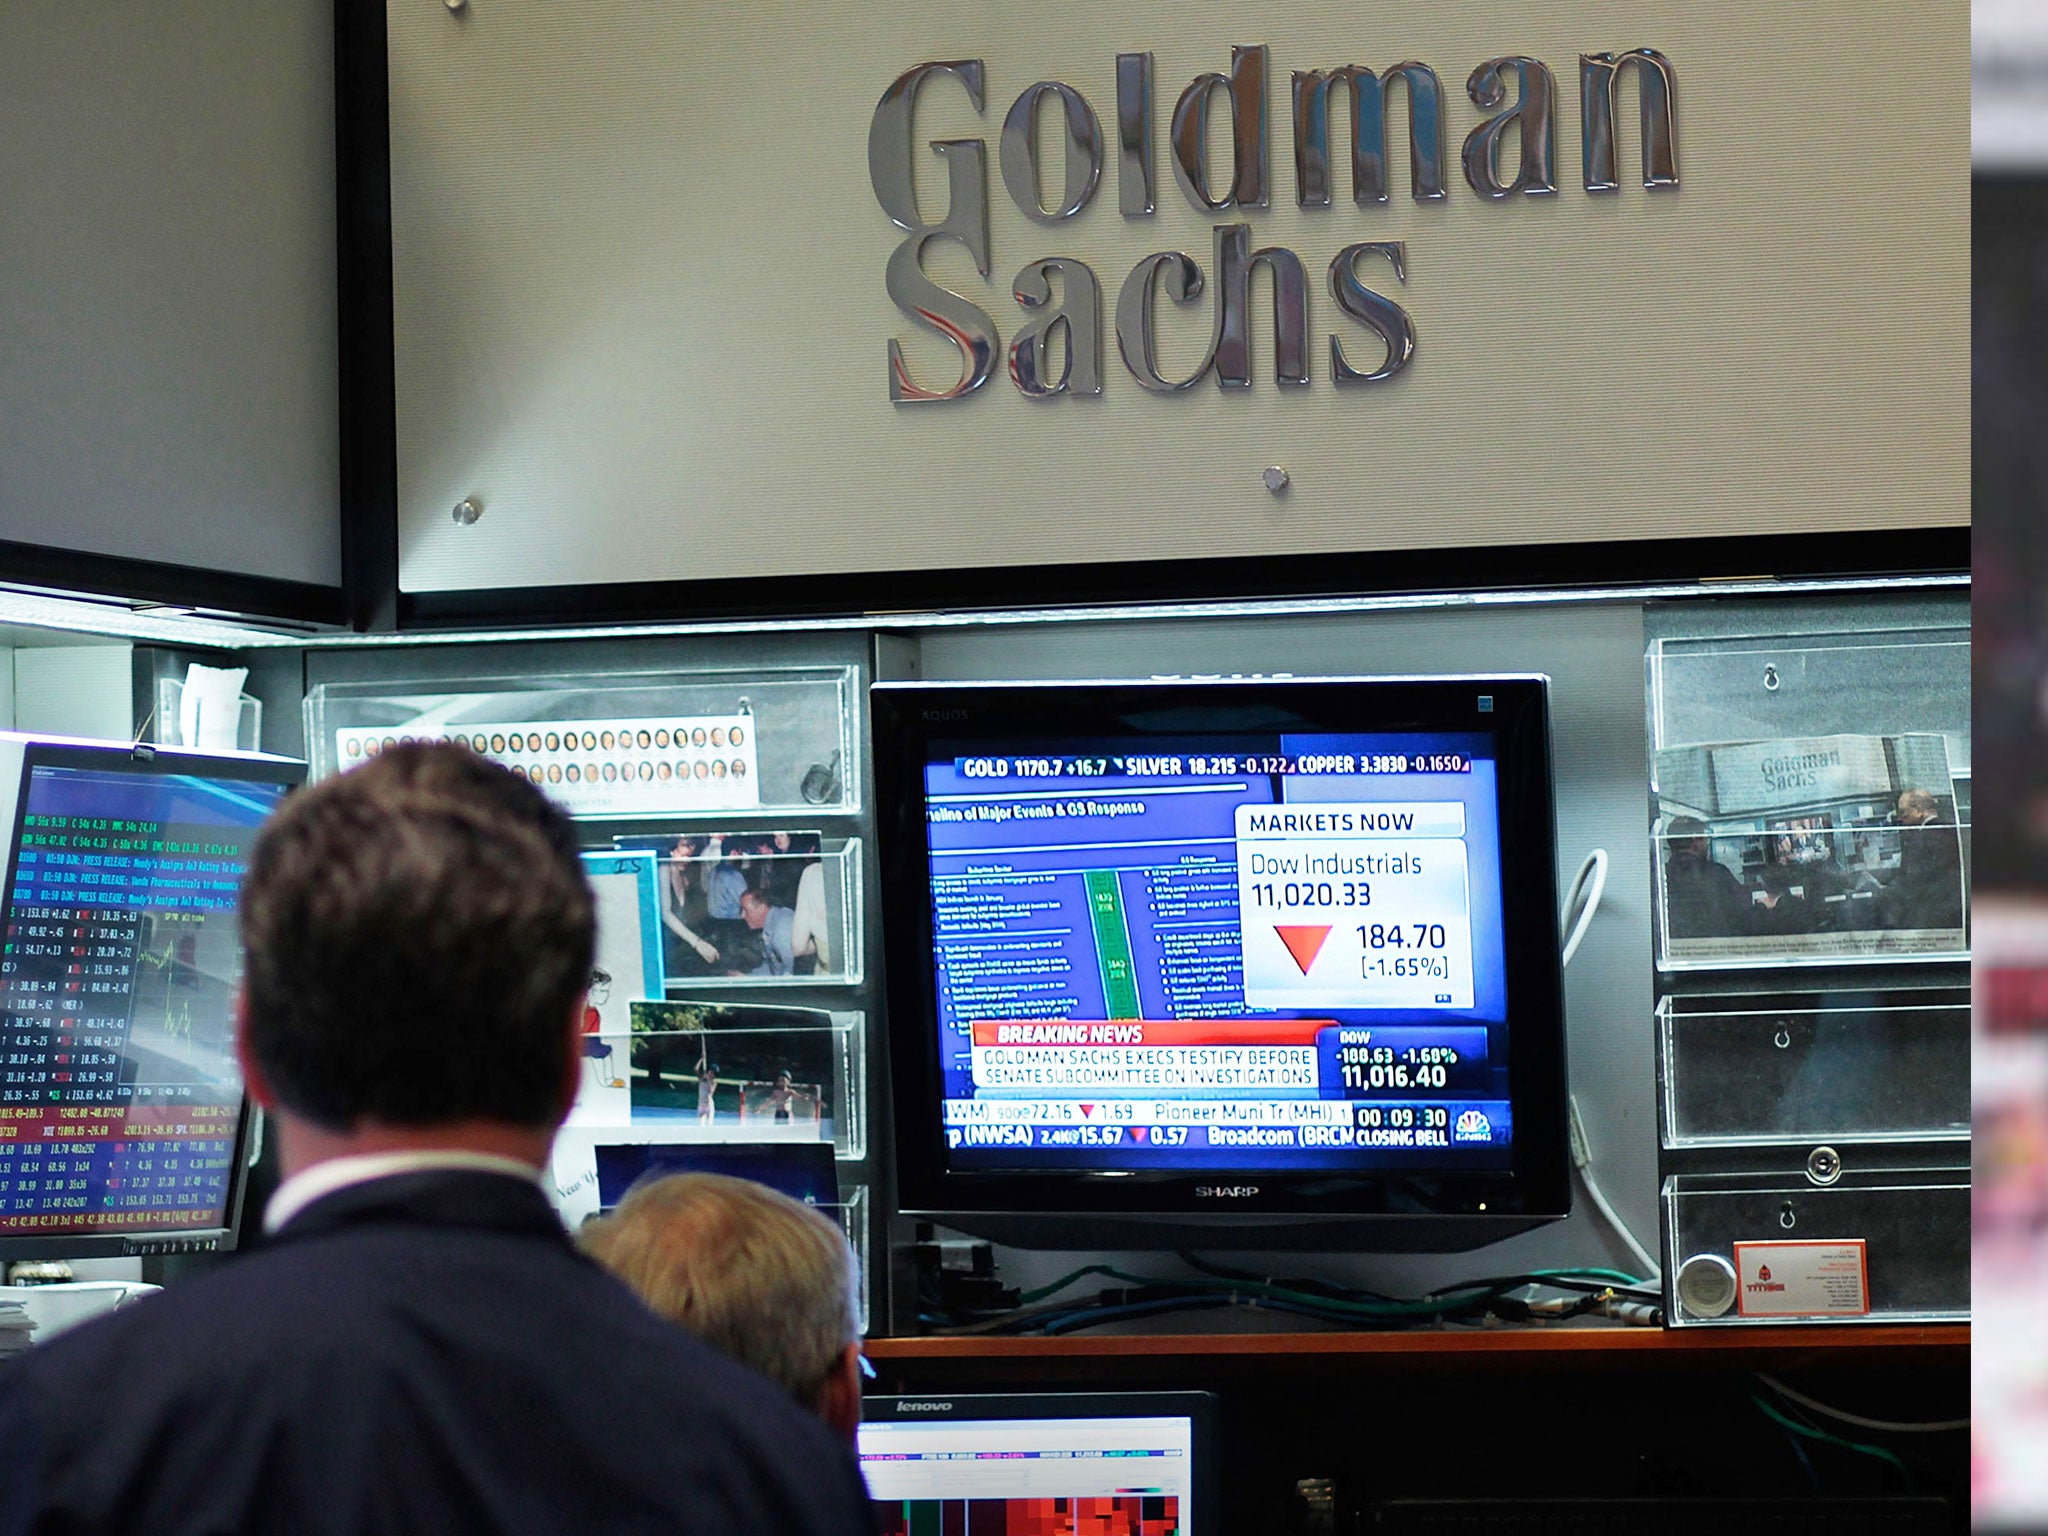 Traders sit in the Goldman Sachs booth on the floor of the New York Stock Exchange watch a television showing market news